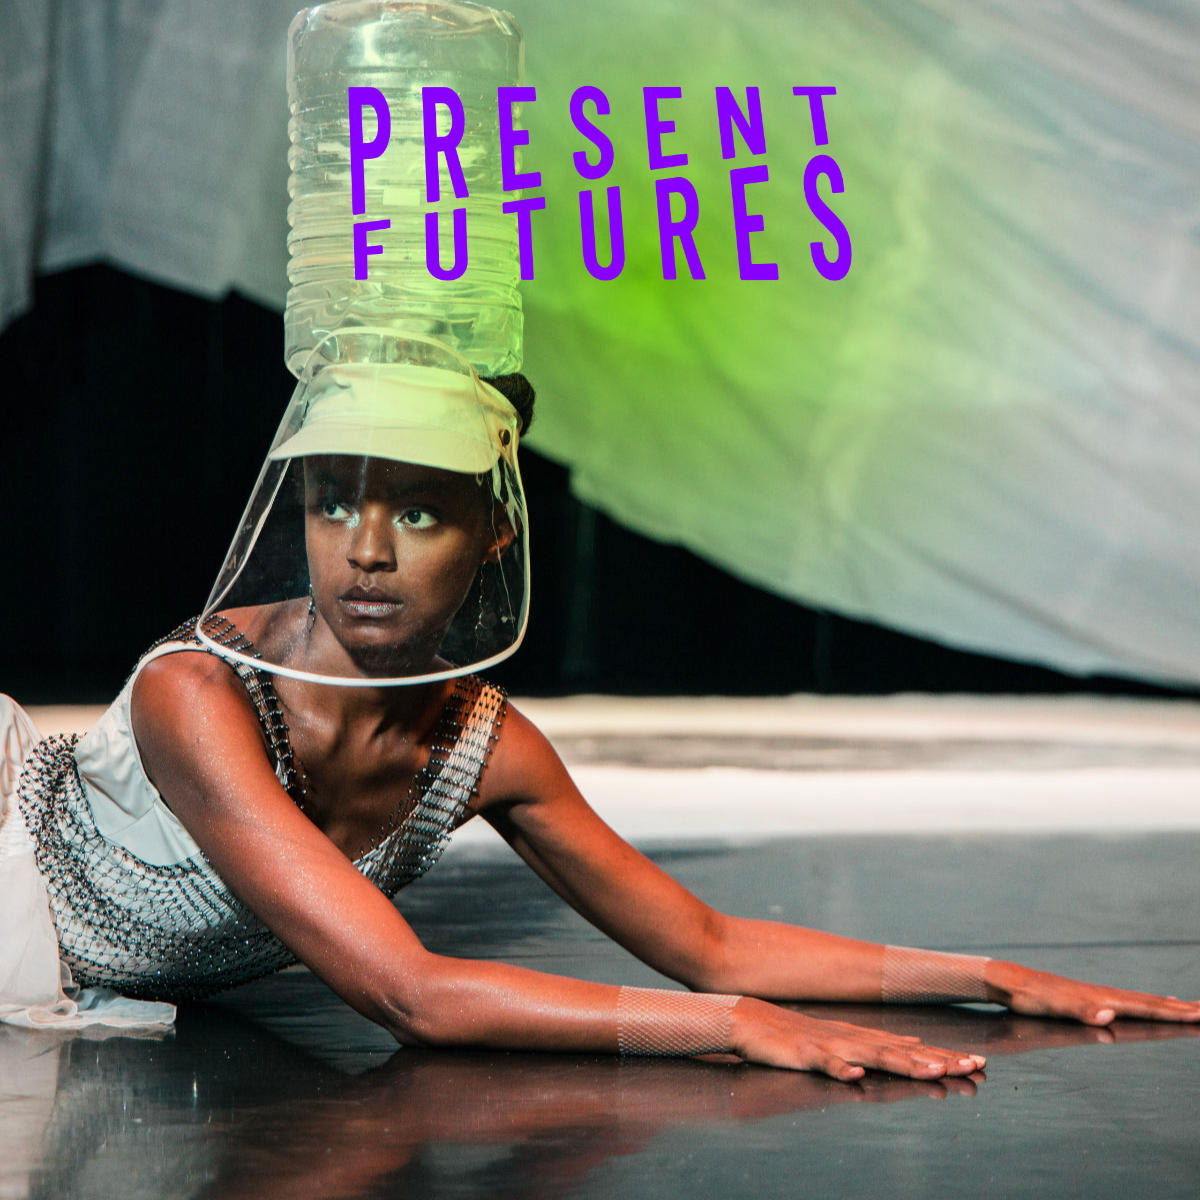 1/3 Present Futures 2023 returns to the @CCA_Glasgow on 22 - 24 June. A bi-annual arts festival curated by Colette Sadler & produced by @FERAL_Arts, this year’s edition focuses on new mythologies & ecological transition as we enter collectively into precarious & unknown futures.